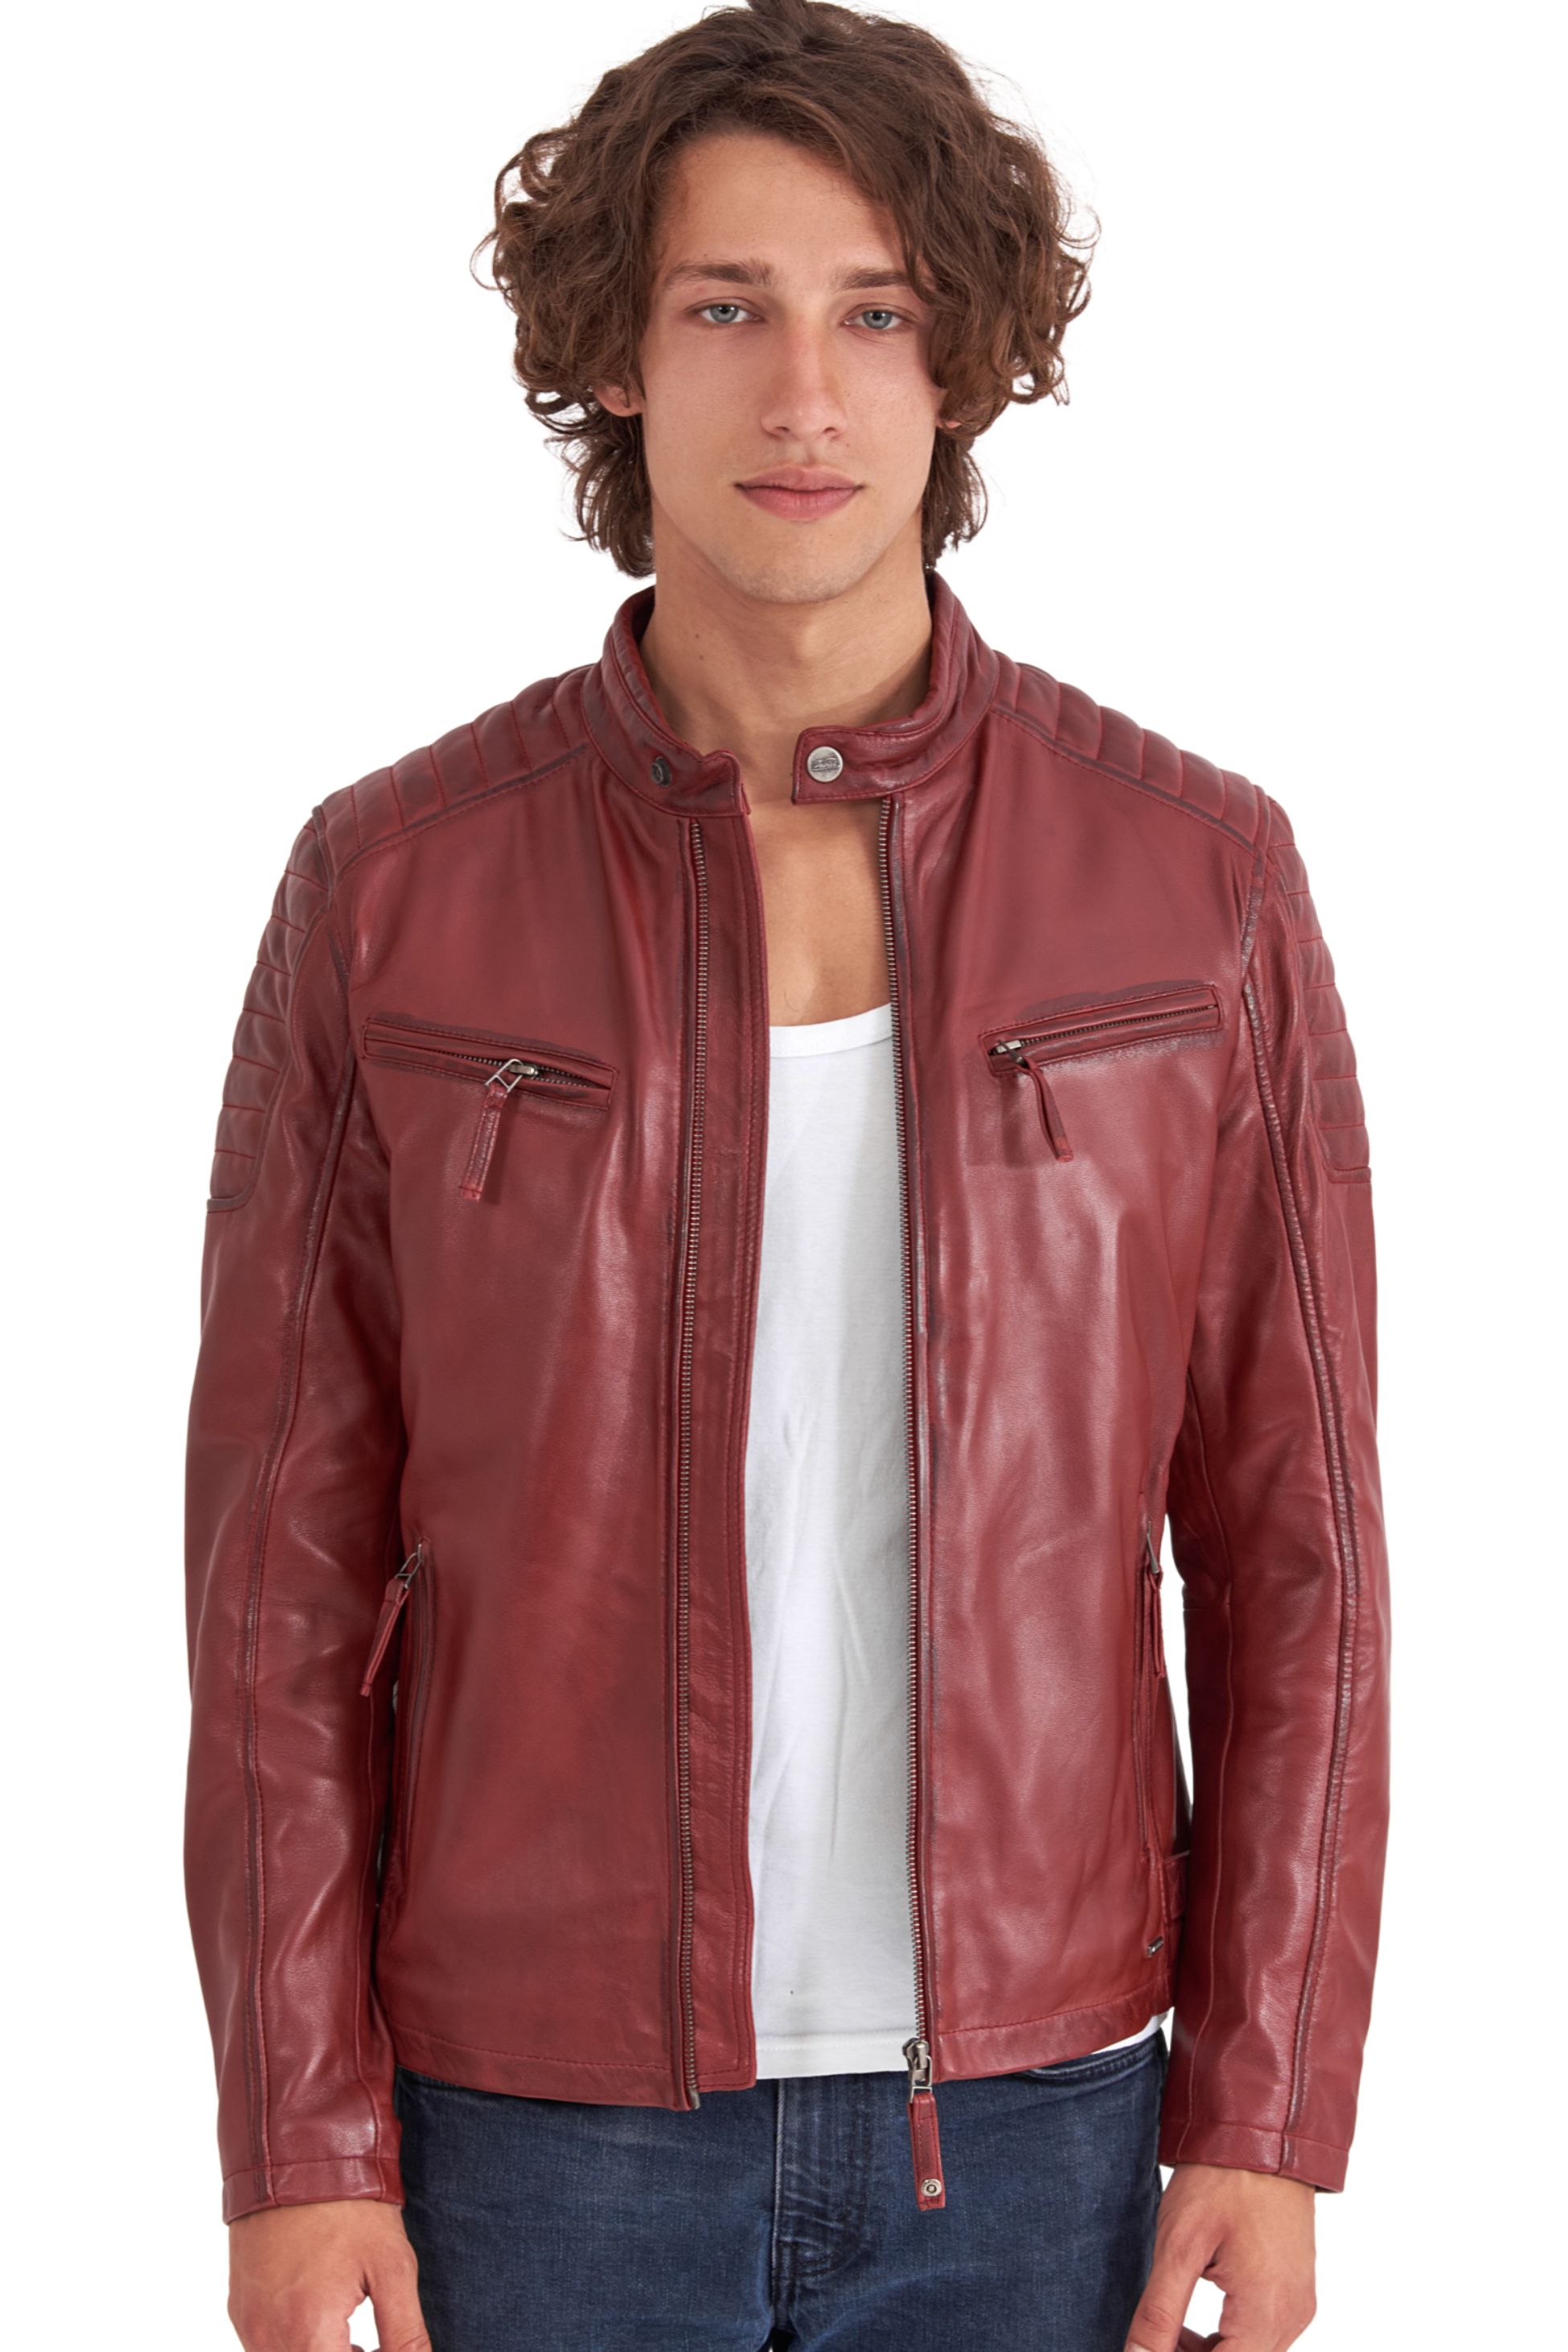 DELTA SHEEP RED - AUTHENTIC MENS LEATHER JACKET